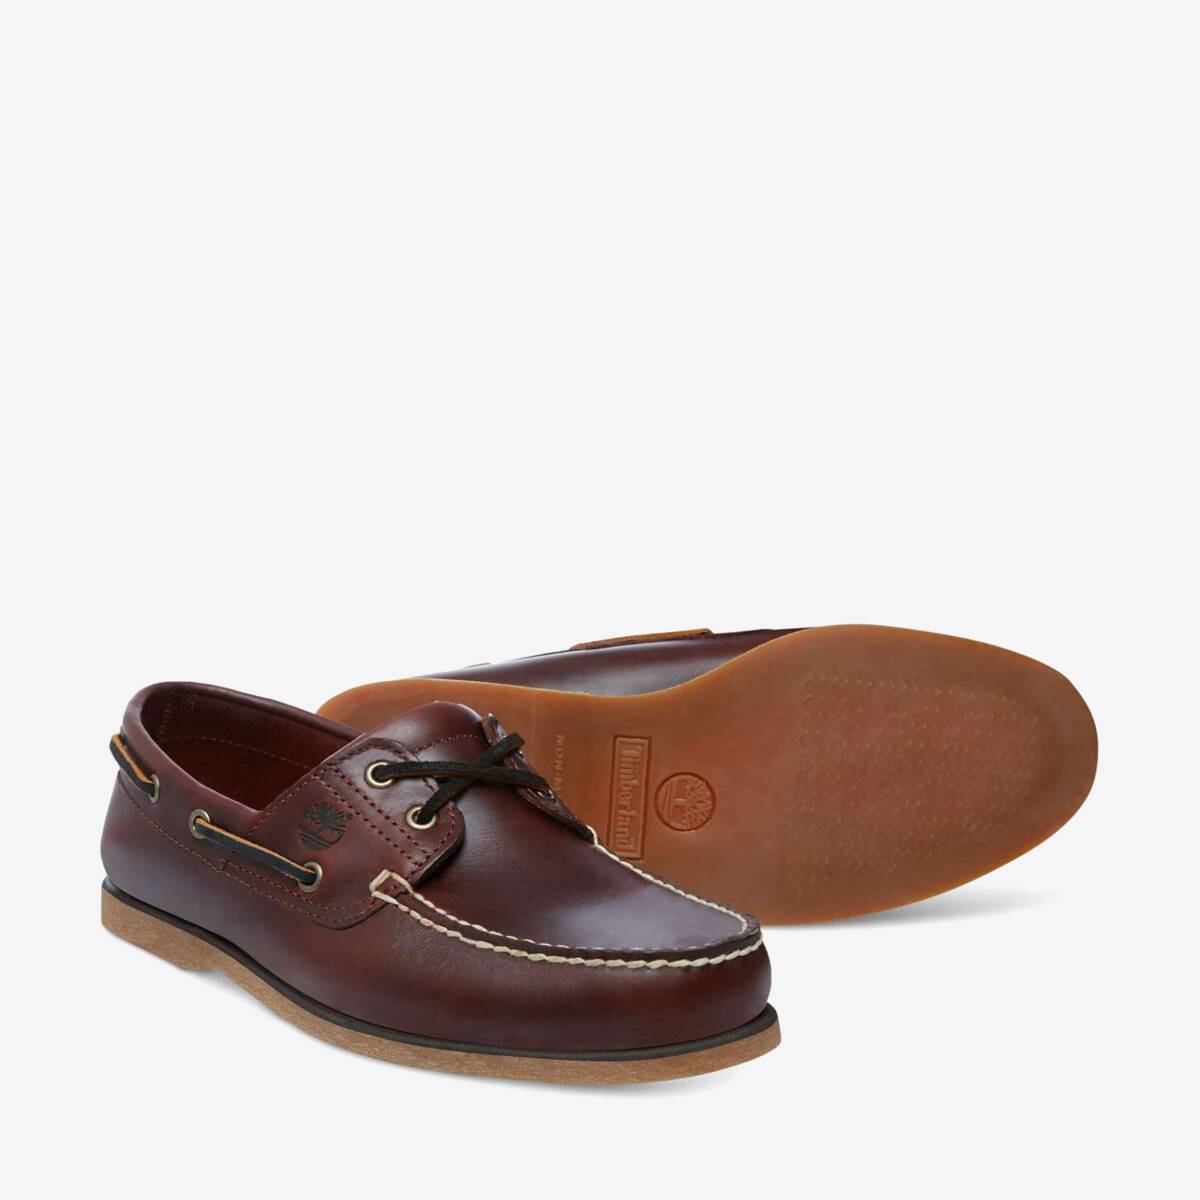 TIMBERLAND Classic 2-Eye Boat Shoes Rootbeer - Image 5